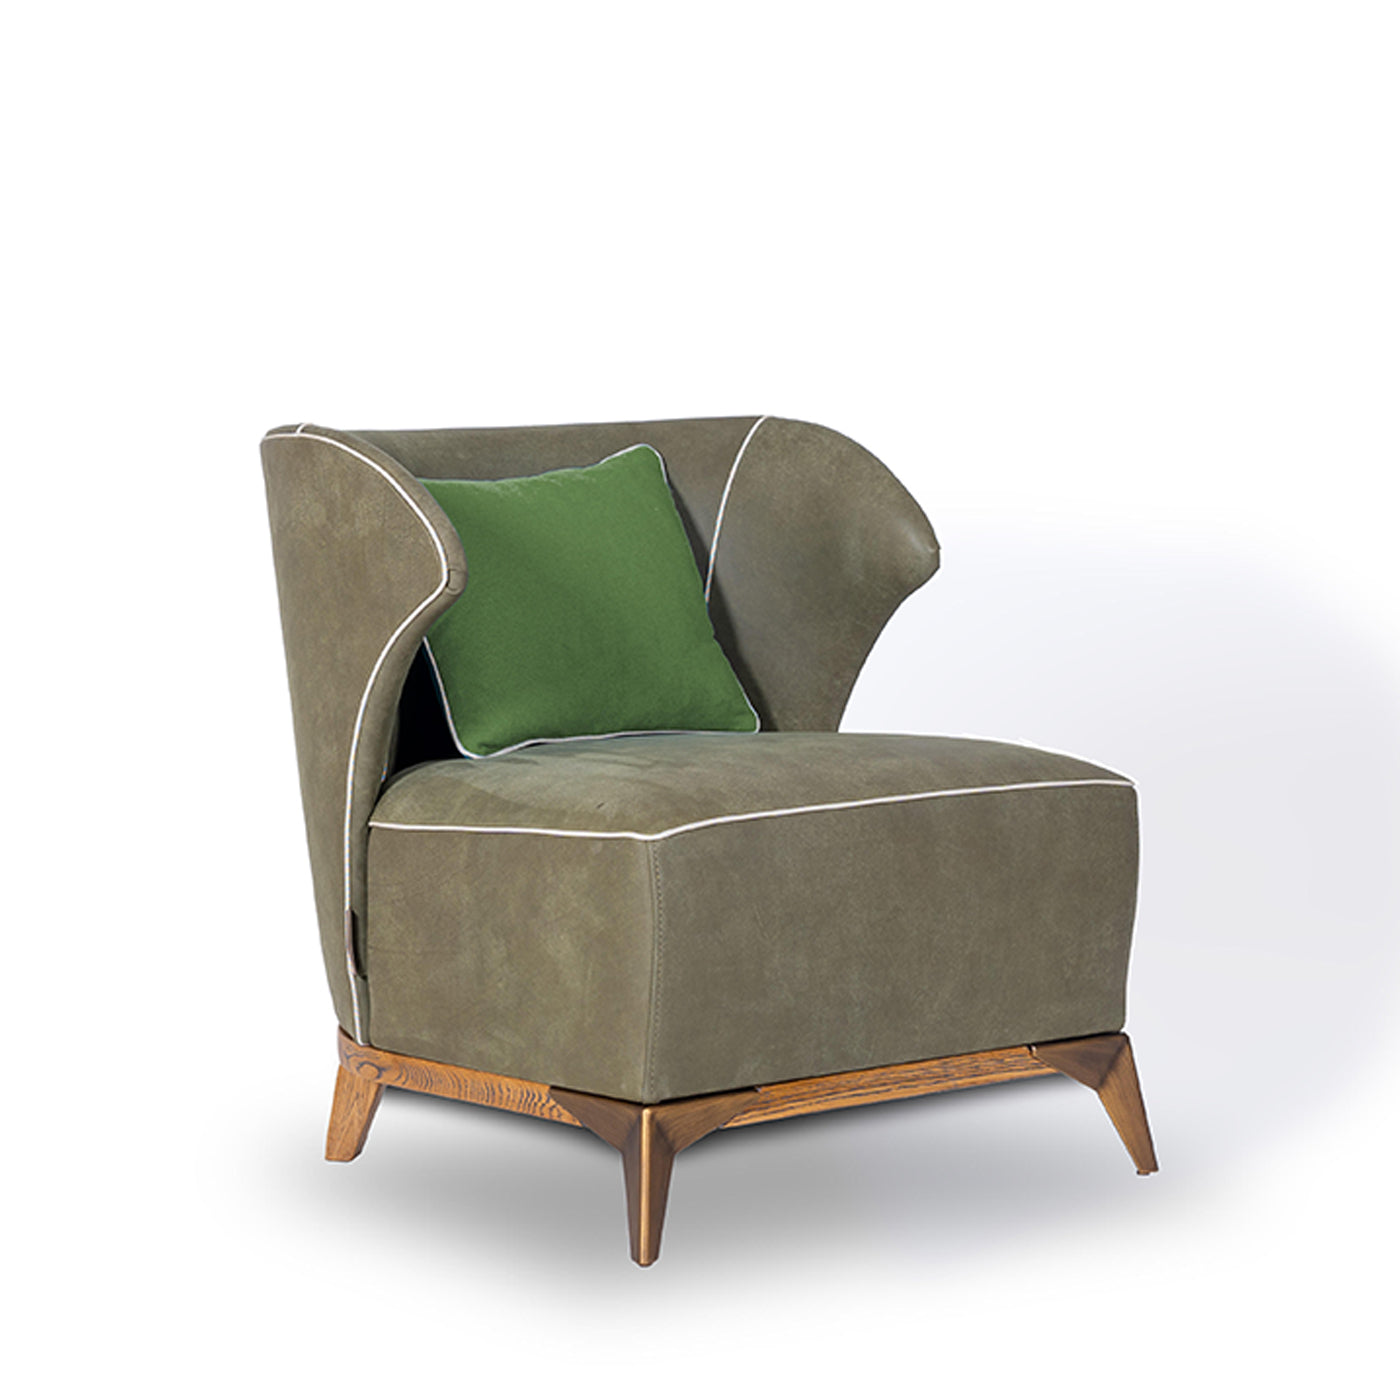 Agostina Green Leather Lounge Chair - Alternative view 1